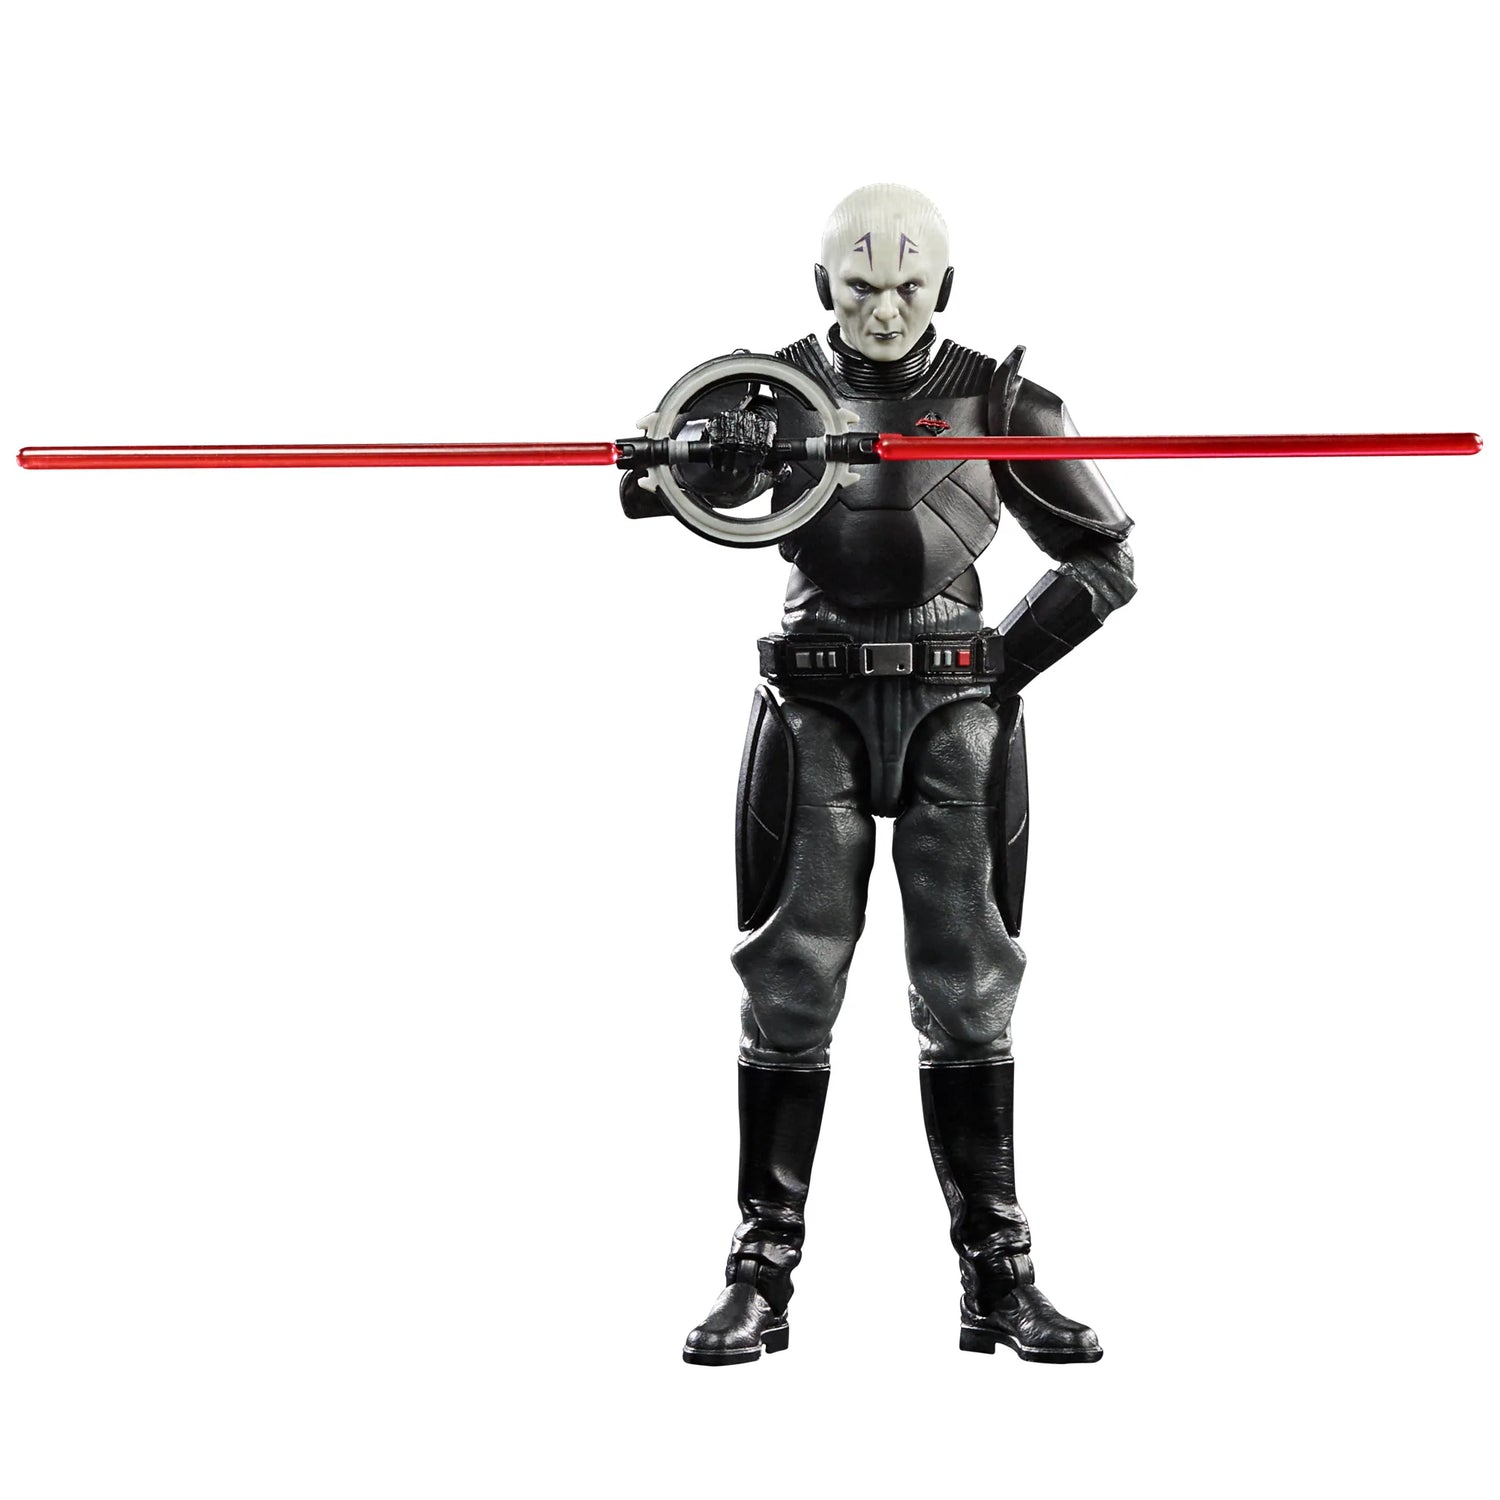 hasbro star wars black series grand inquisitor action figure with lightsaber